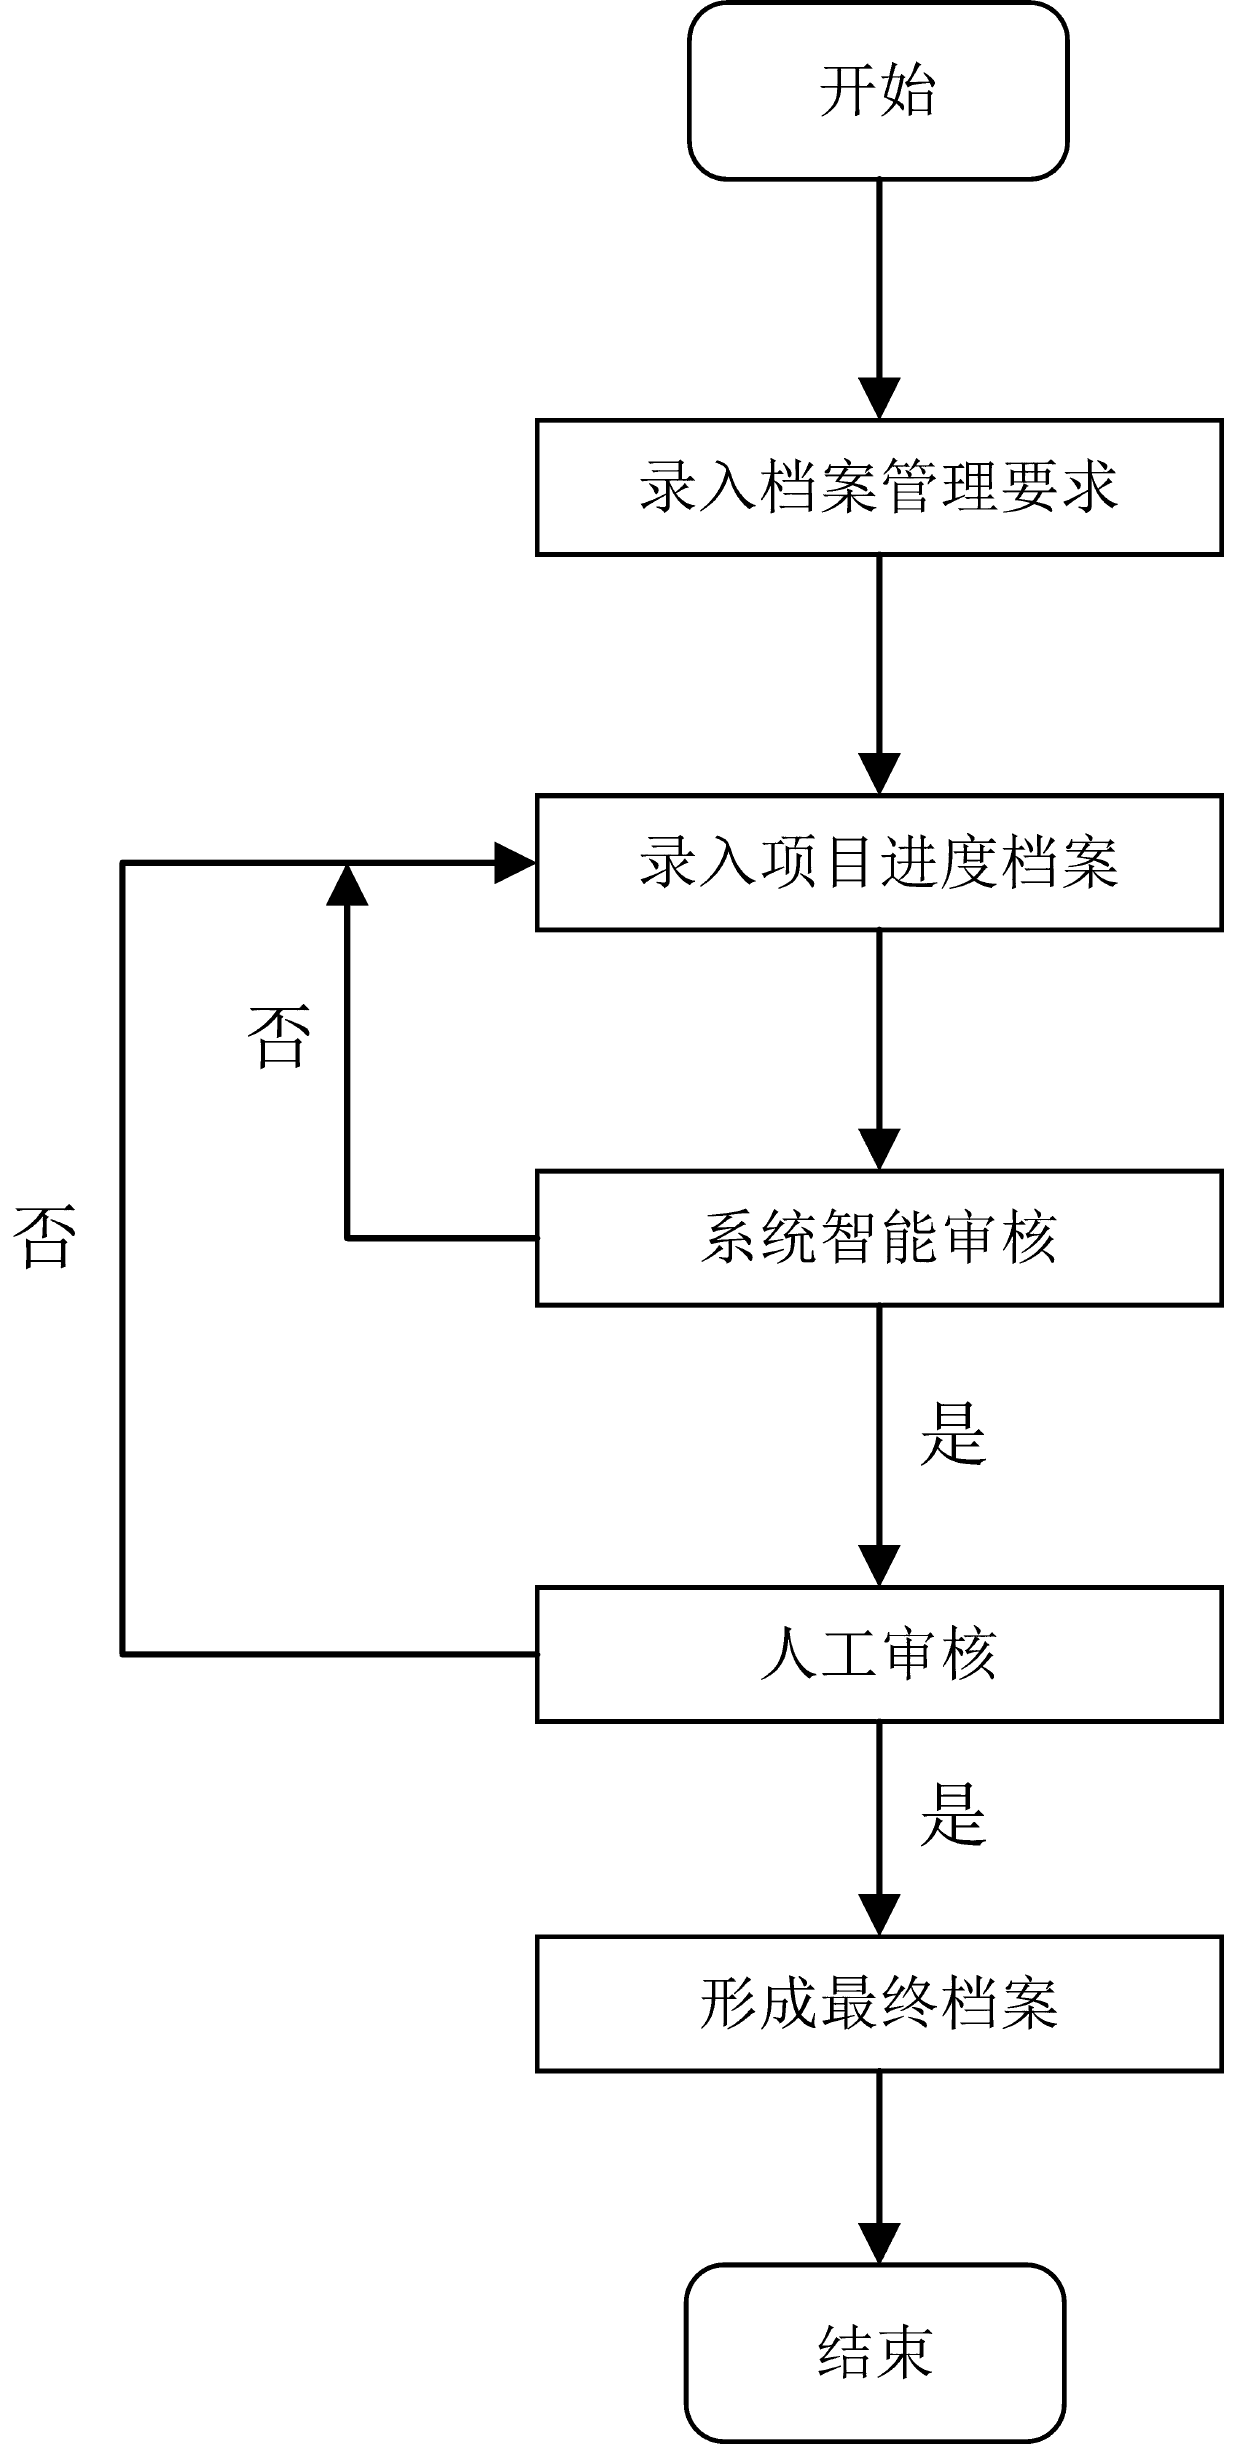 Power production project file management system capable of storing according to progress